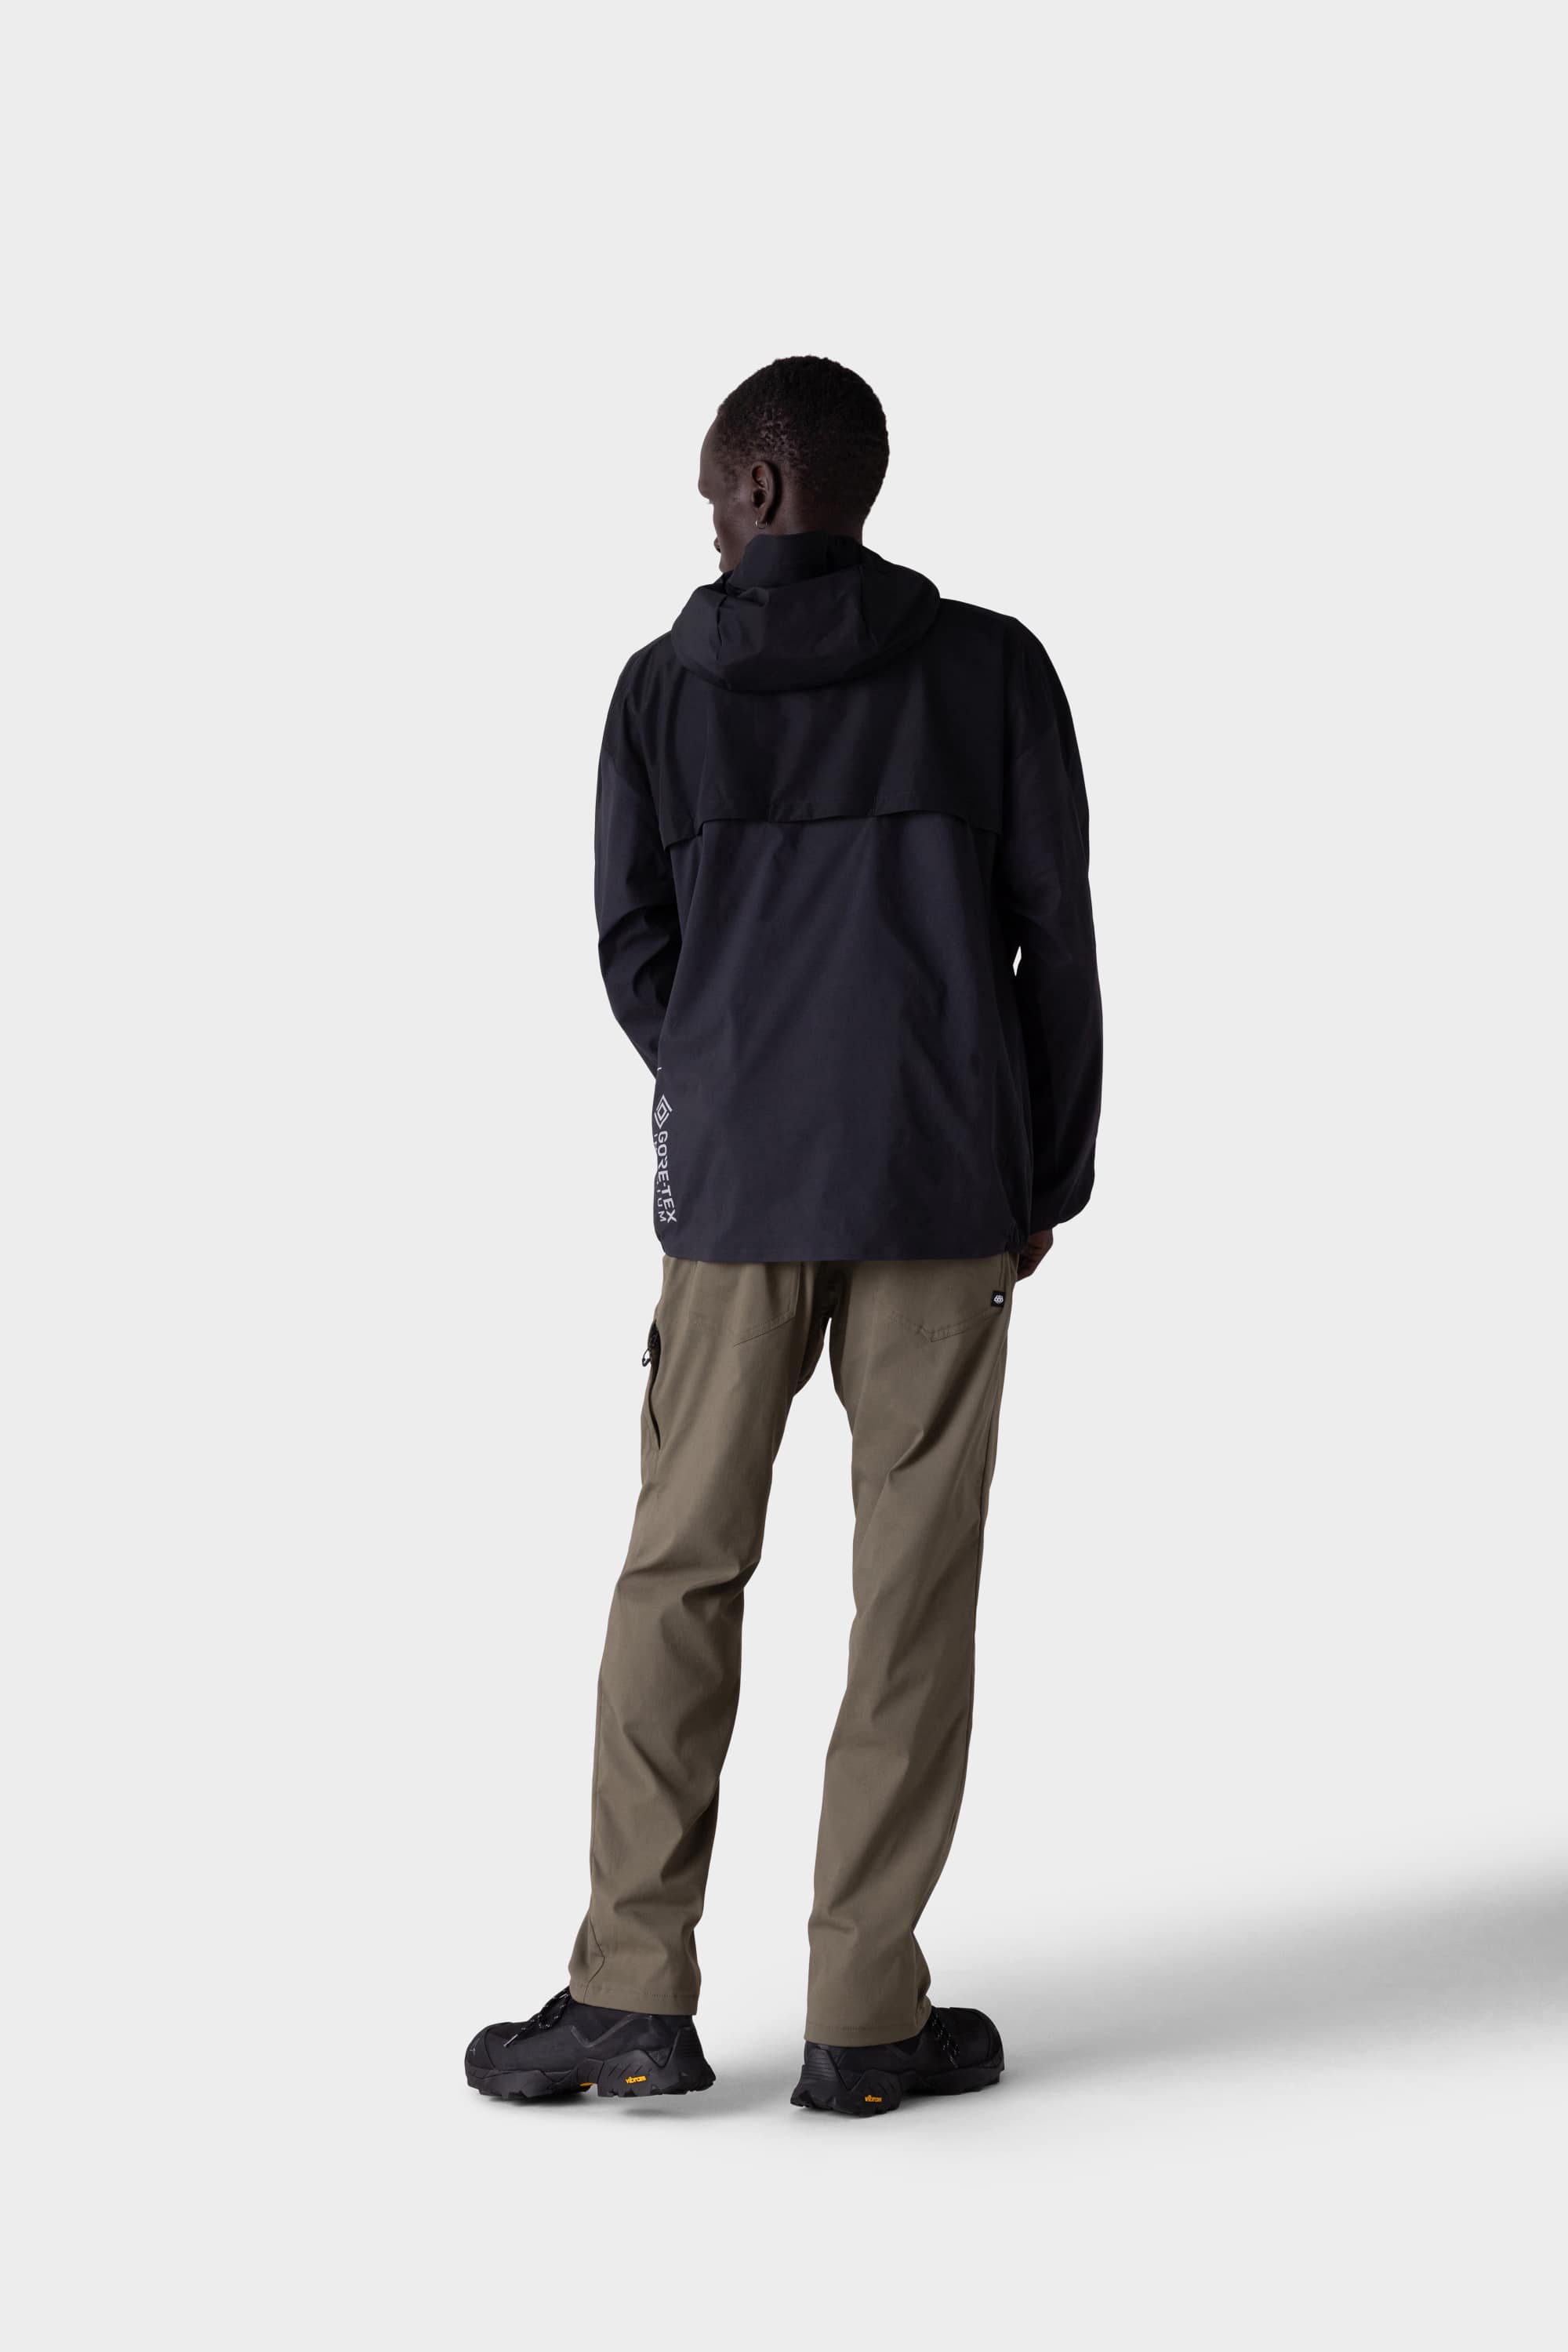 686 Men's Everywhere Merino-Lined Pant - Relaxed Fit